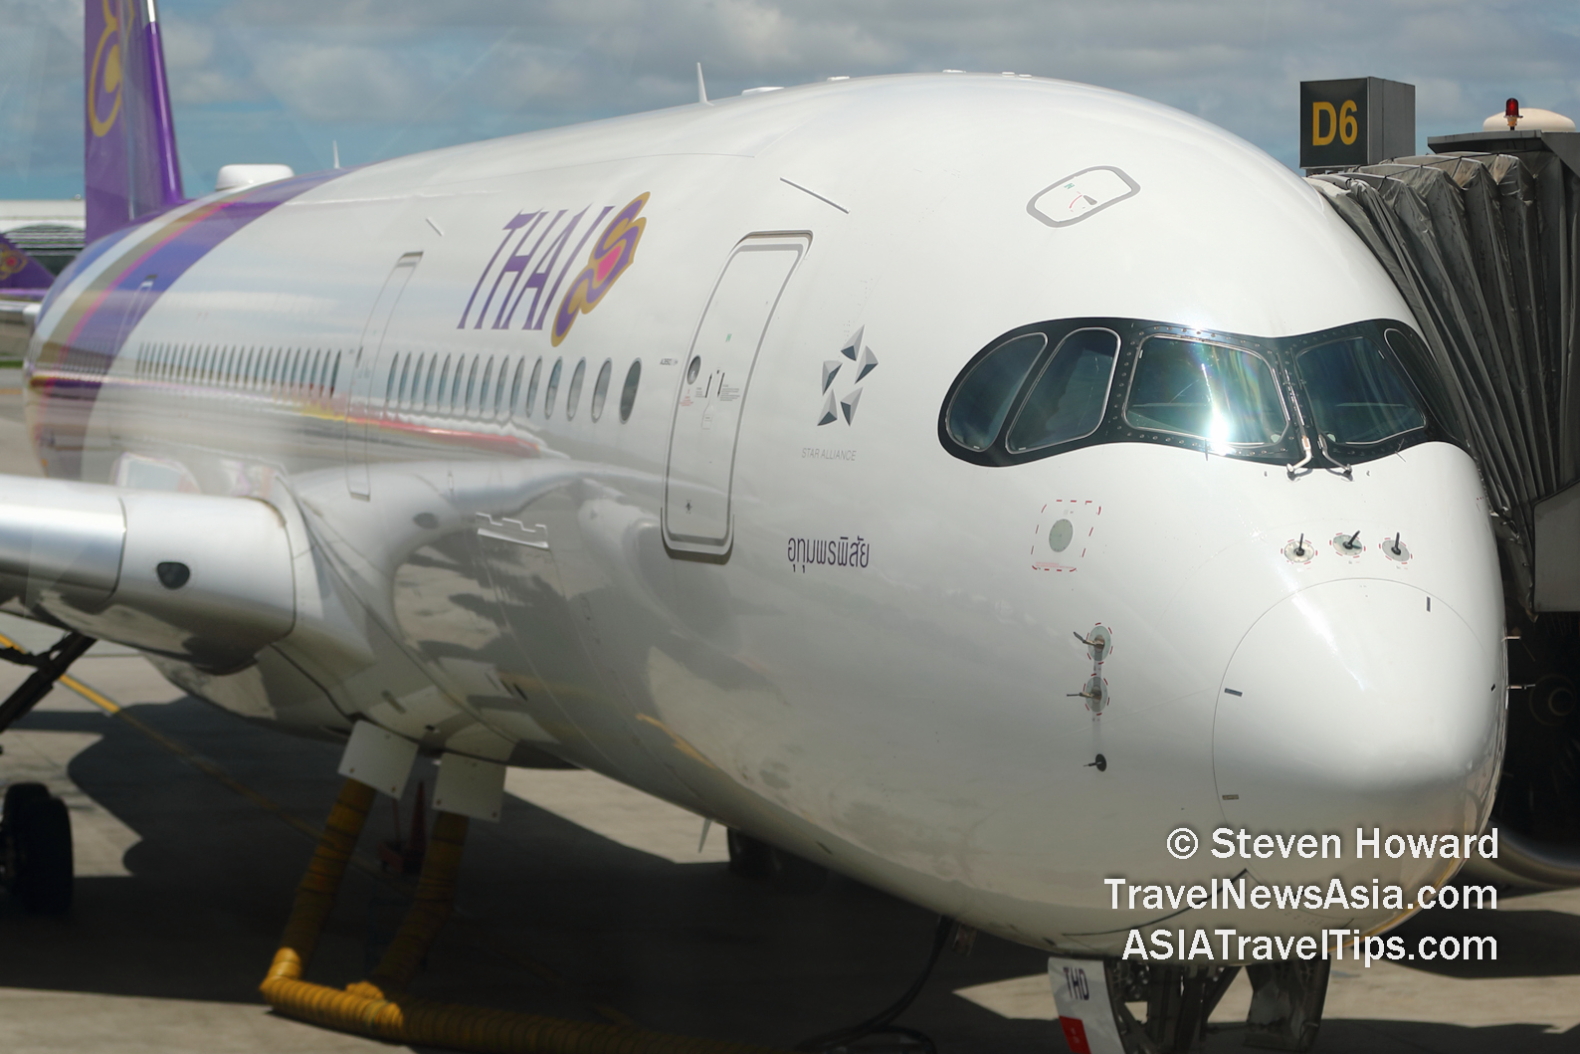 Thai Airways A350-900. Picture by Steven Howard of TravelNewsAsia.com Click to enlarge.